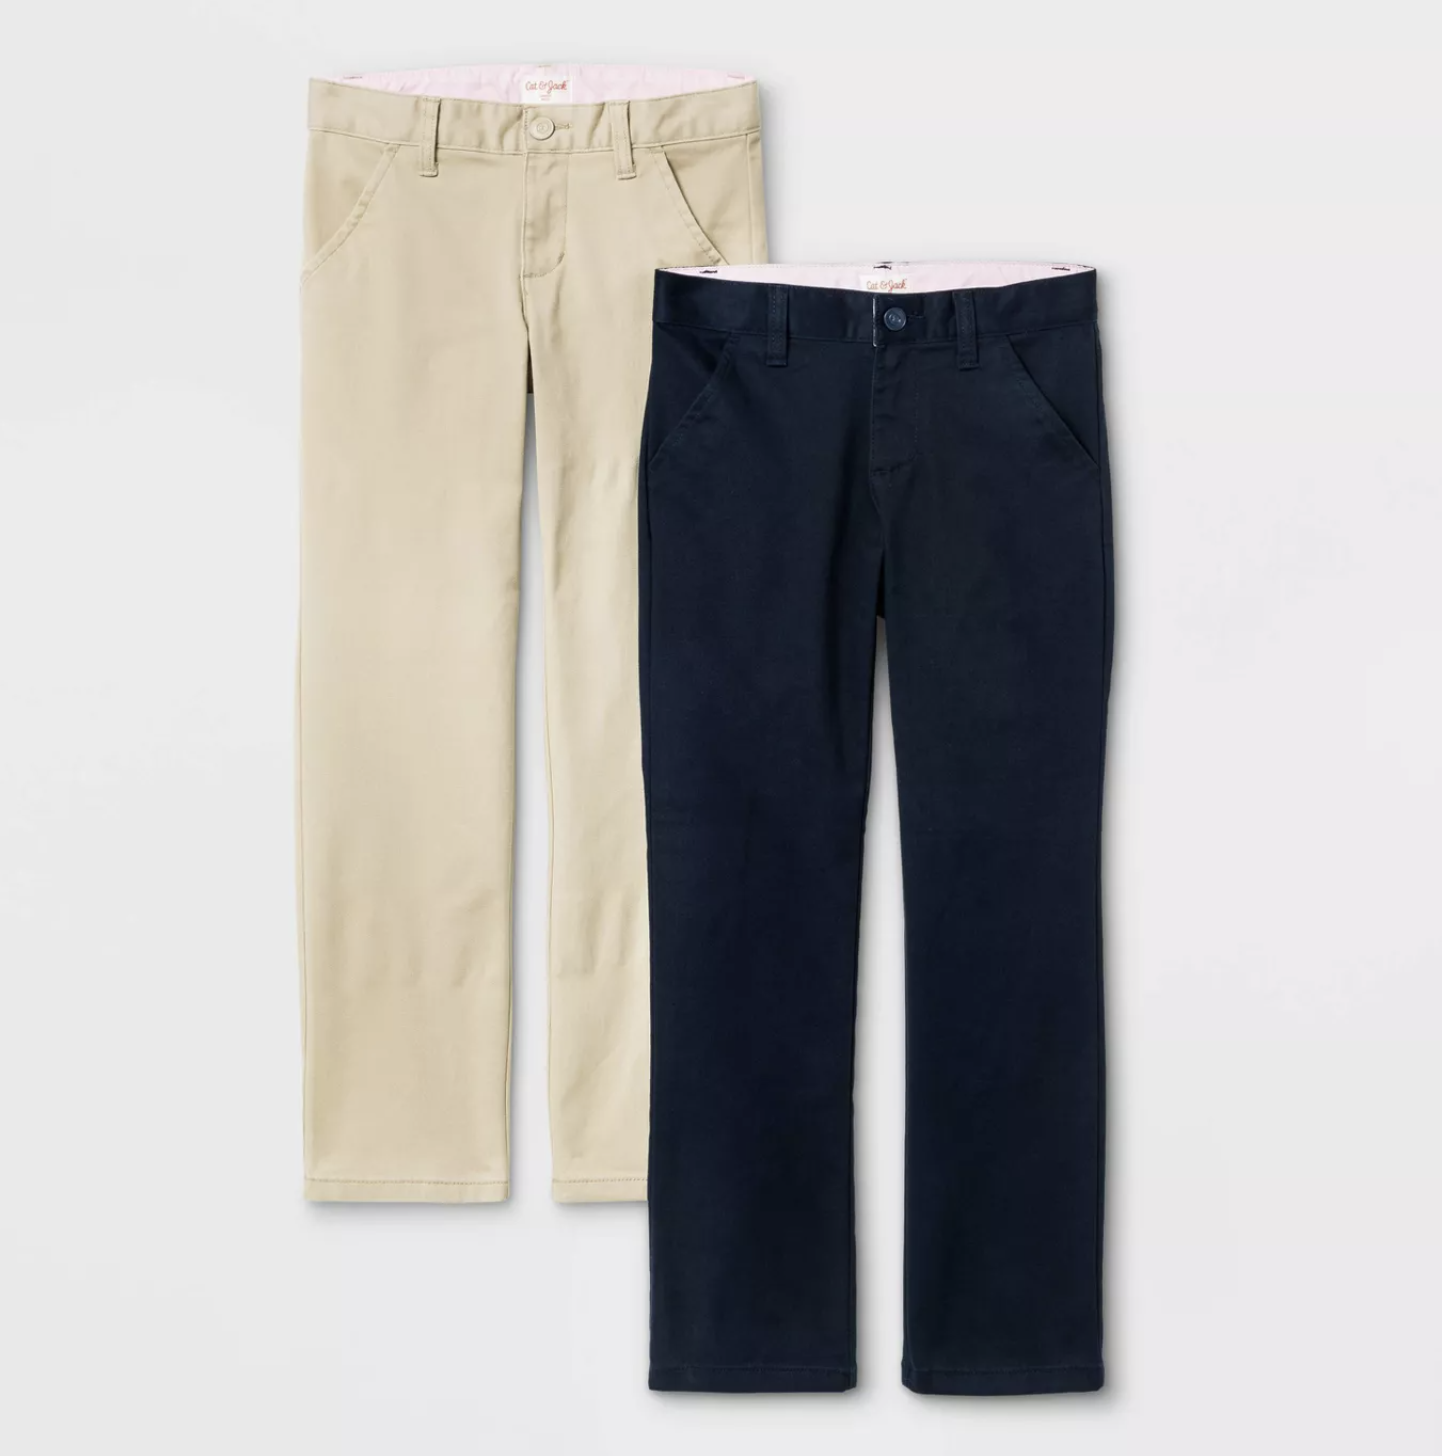 Khaki Pants for Kids: 6 Best of 2021 + 2 Best Kids' Polos (Affordable)